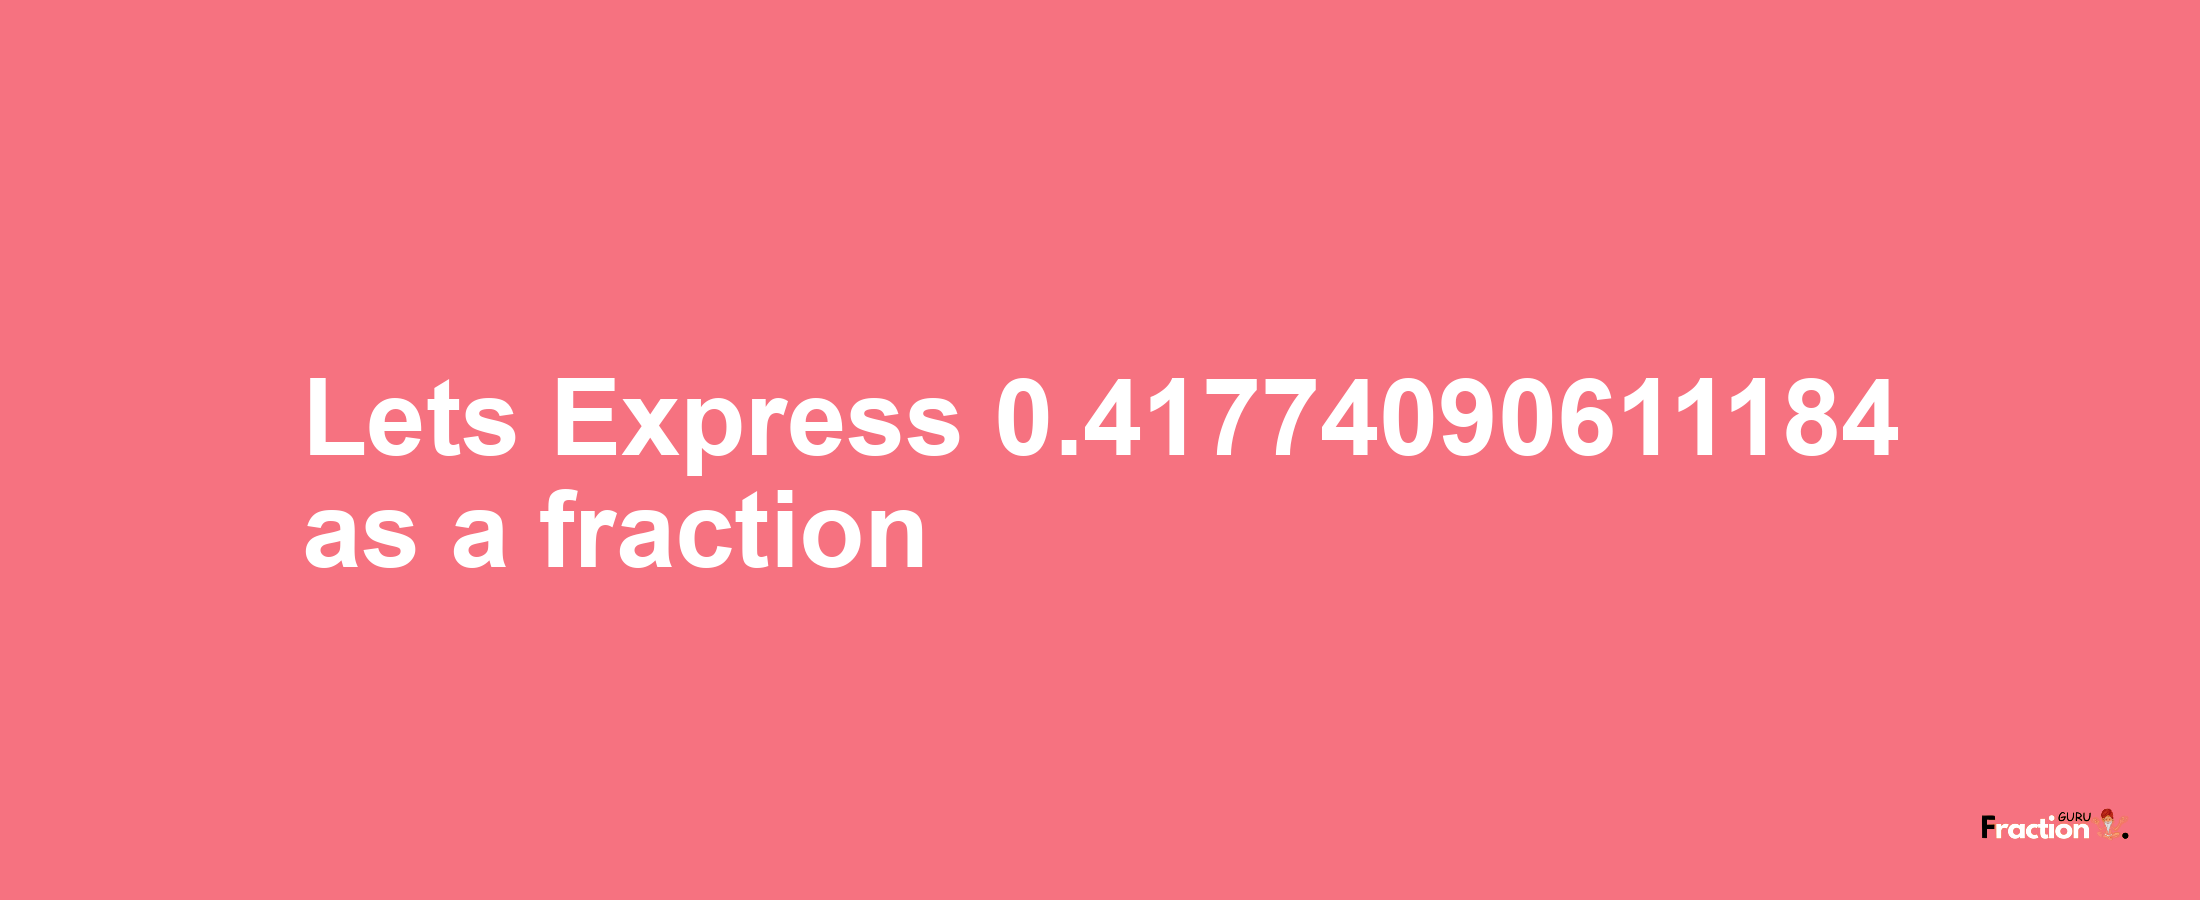 Lets Express 0.41774090611184 as afraction